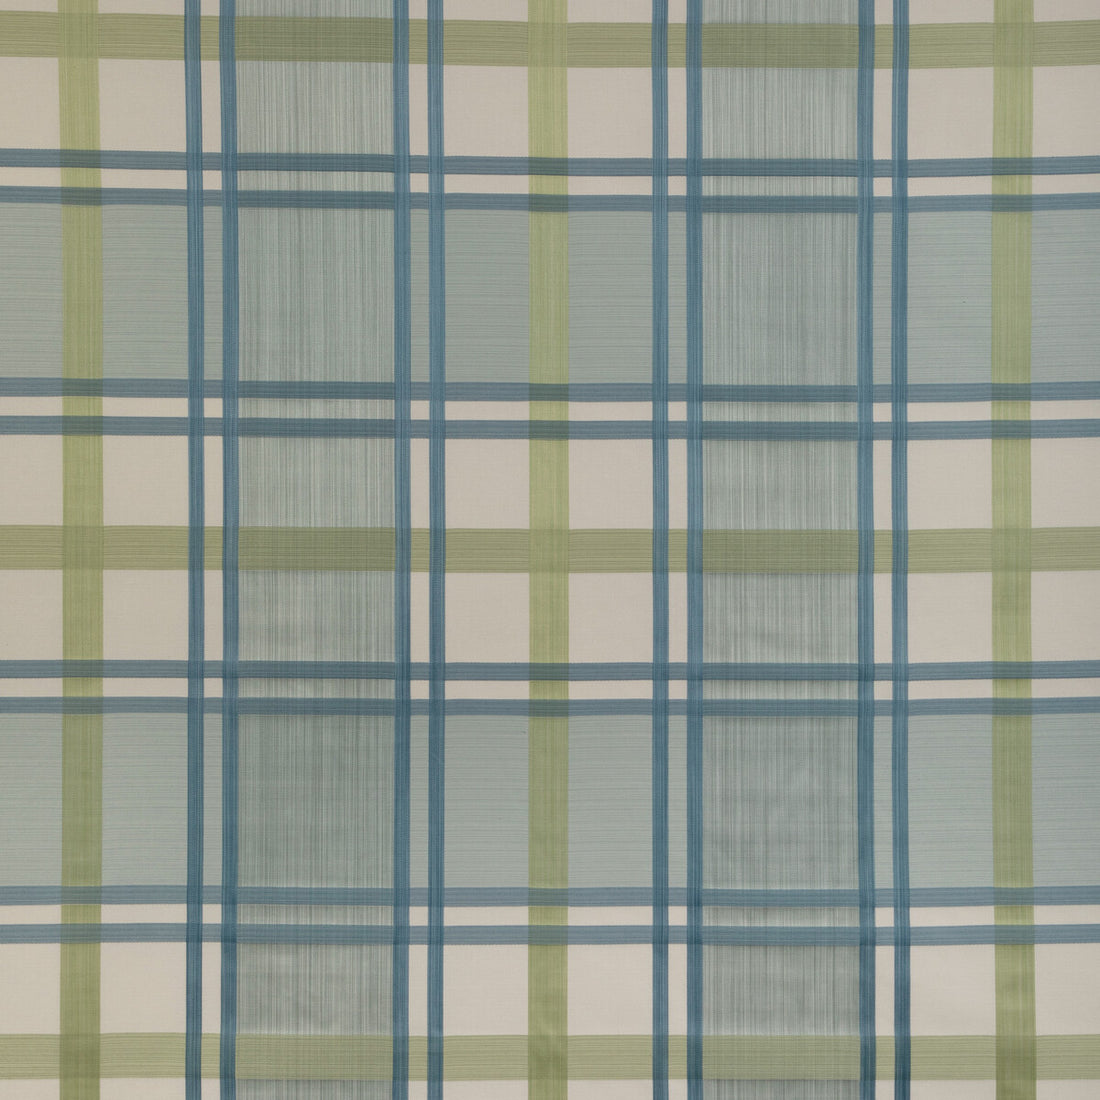 Davies Plaid fabric in aqua/leaf color - pattern 2023109.353.0 - by Lee Jofa in the Highfield Stripes And Plaids collection